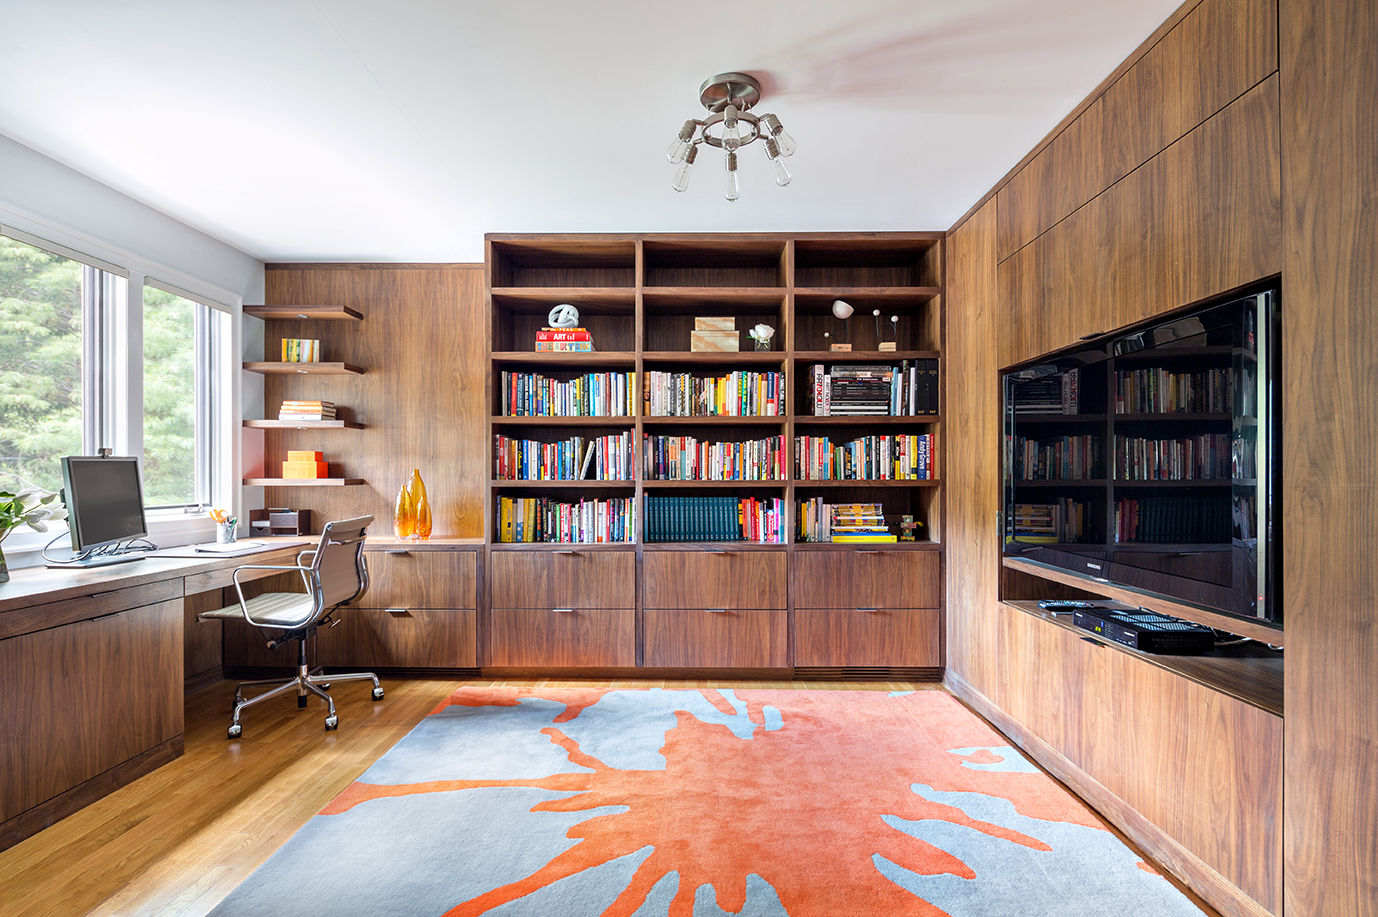 Home Offices, Clean Design Clean Design Modern study/office